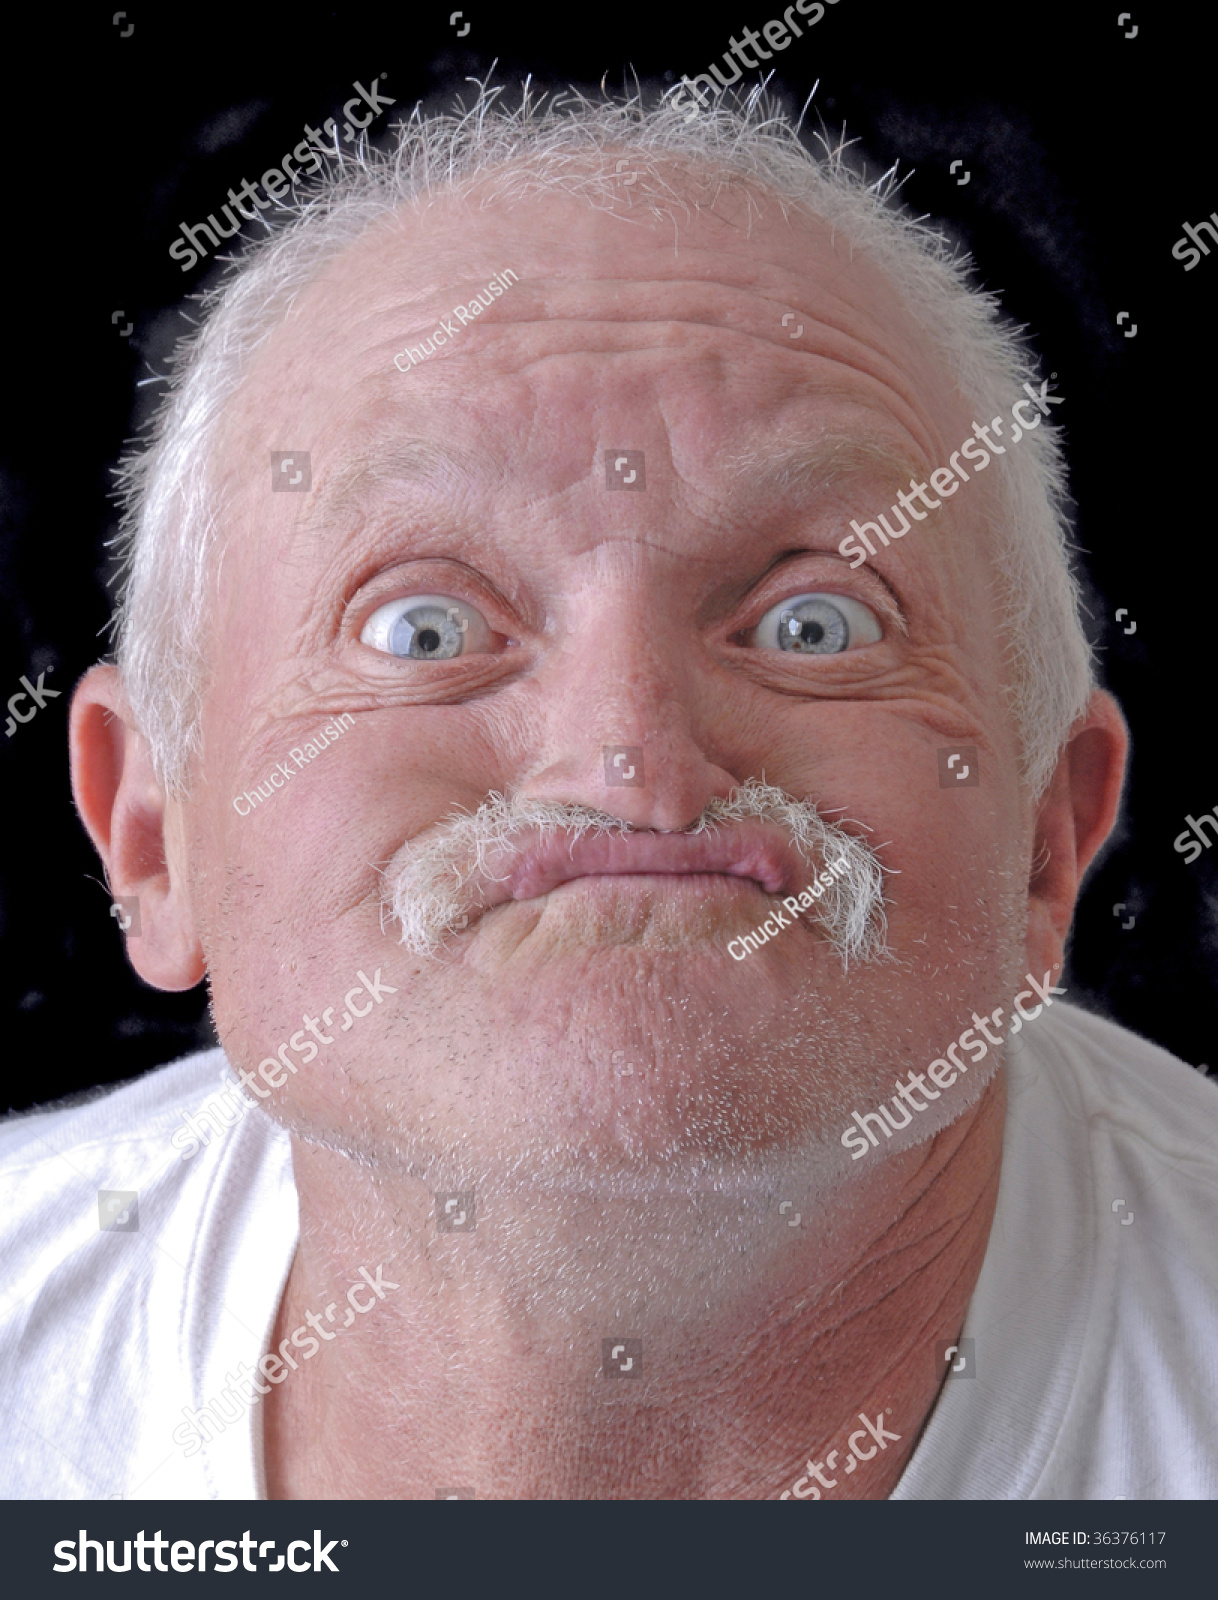 Old Man Funny Face Stock Photo (Royalty Free) 36376117 - Shutterstock